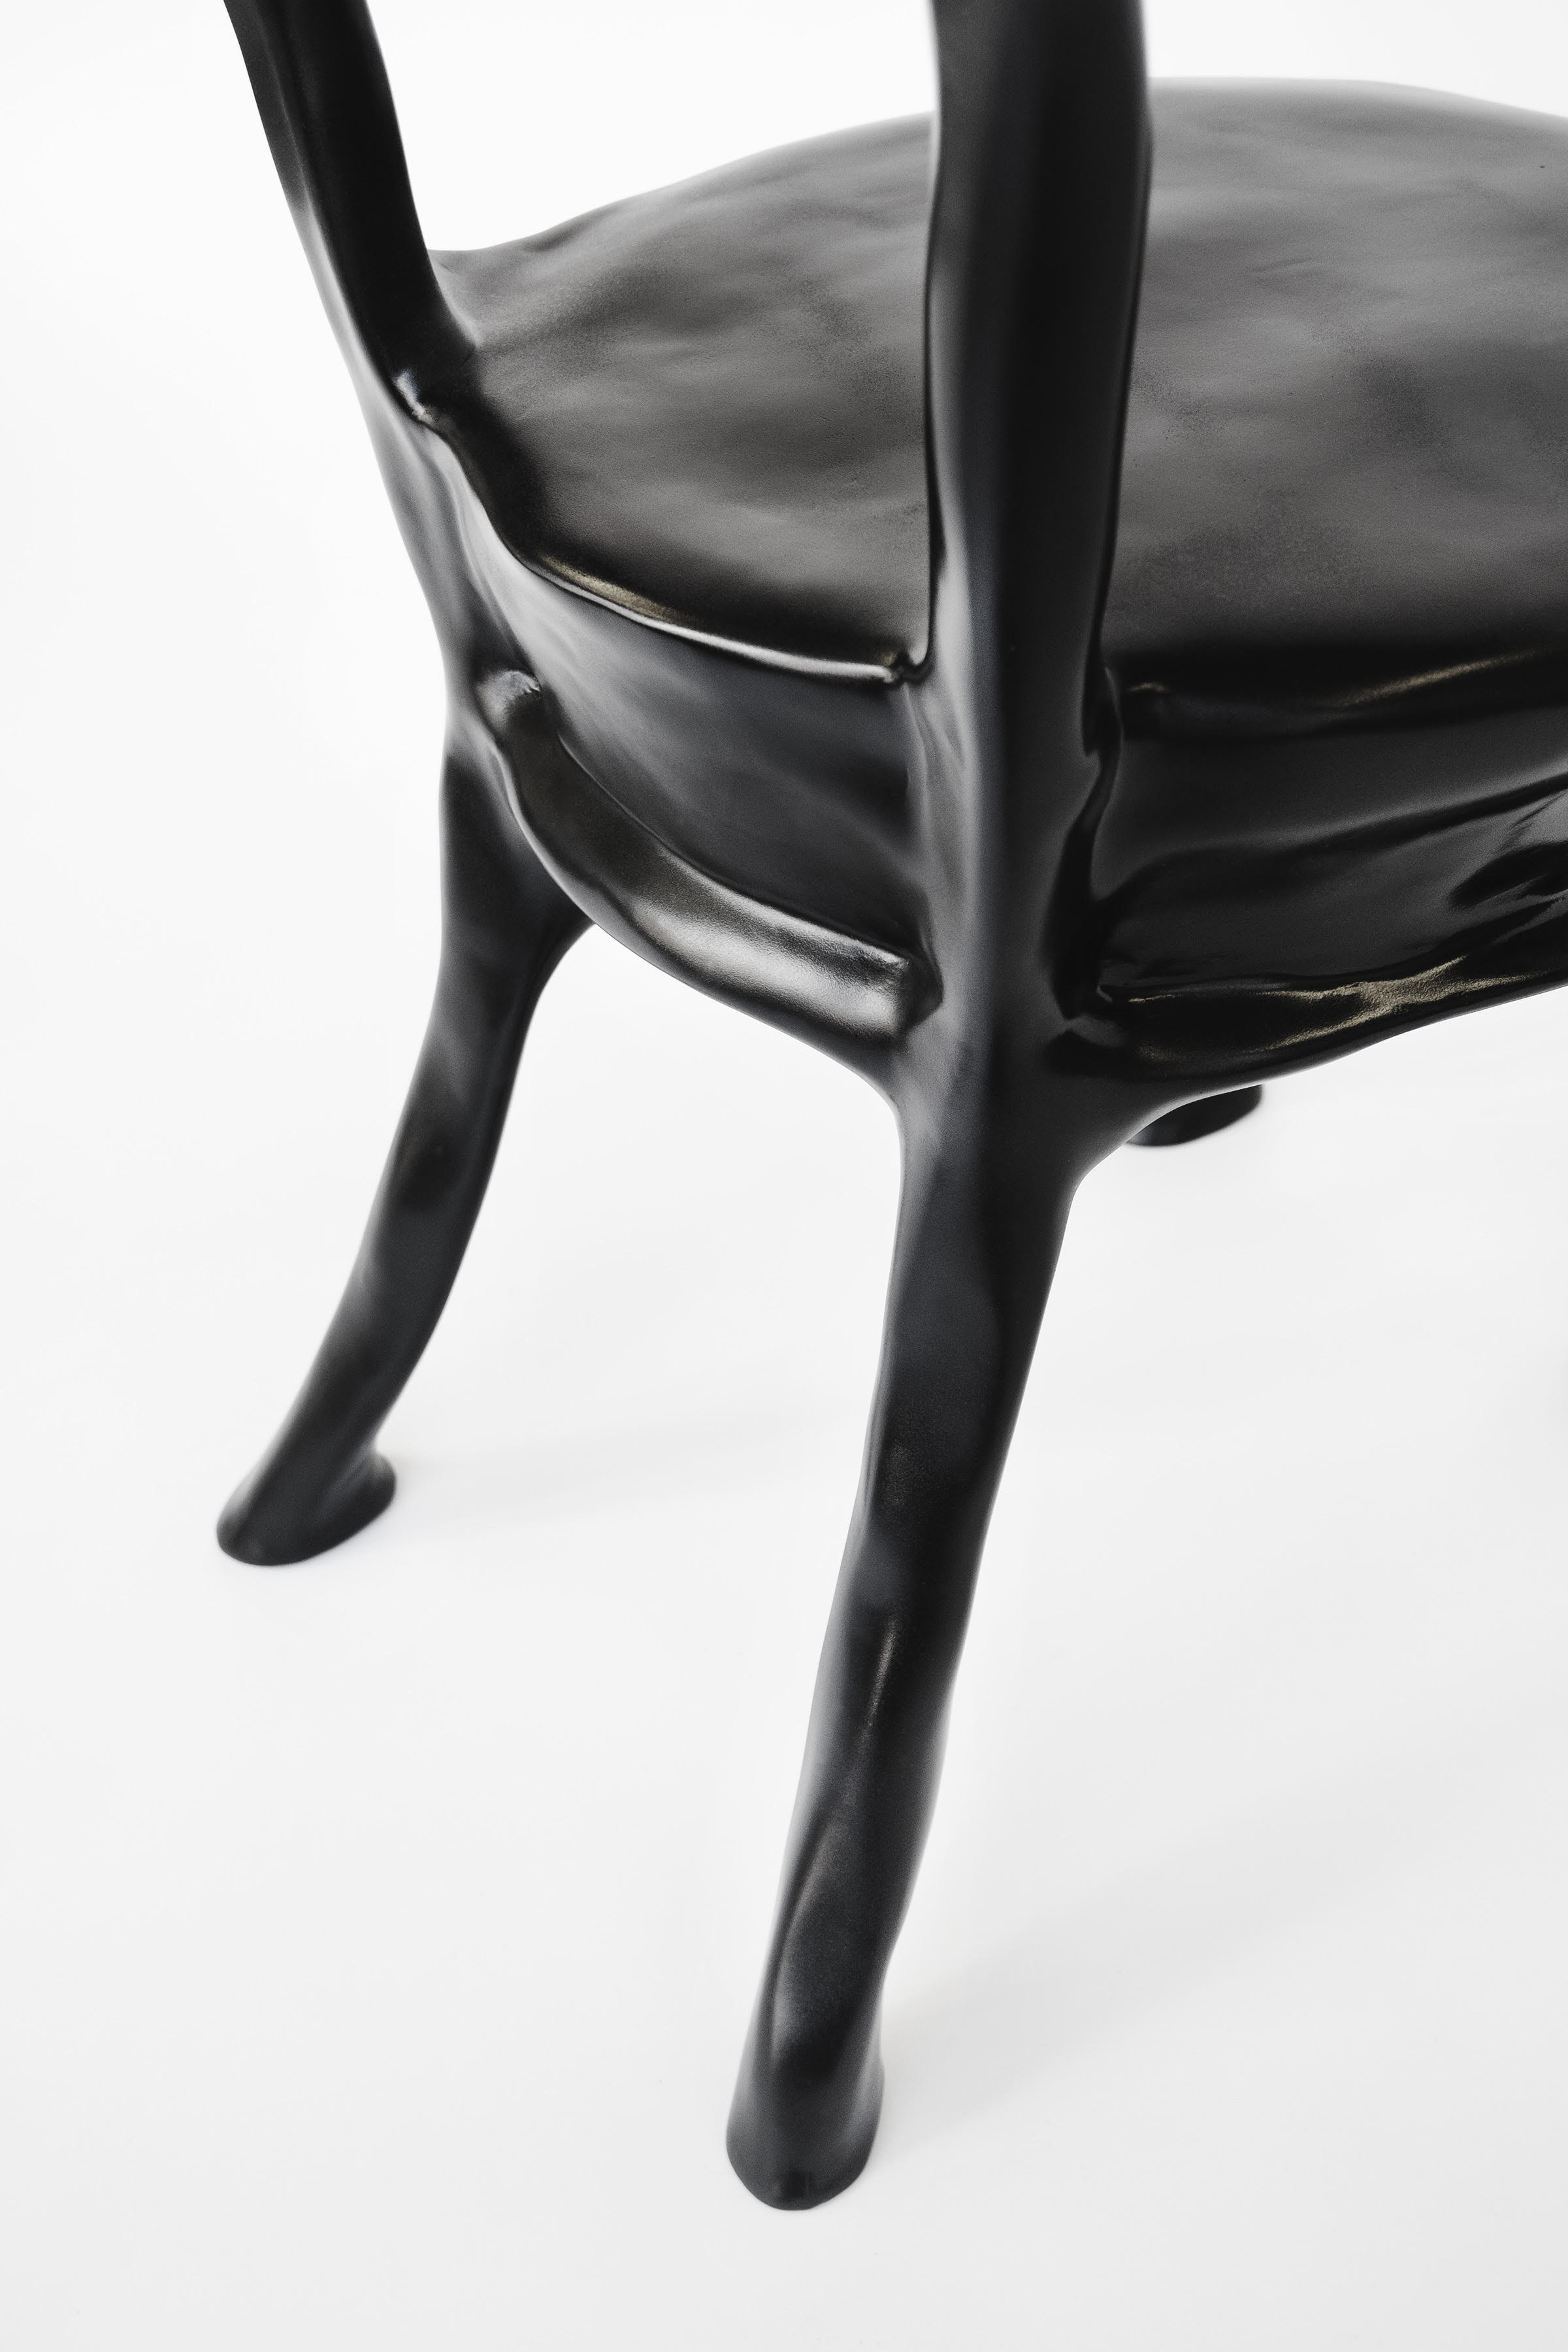 A glossy black chair with warbled surface texture. 